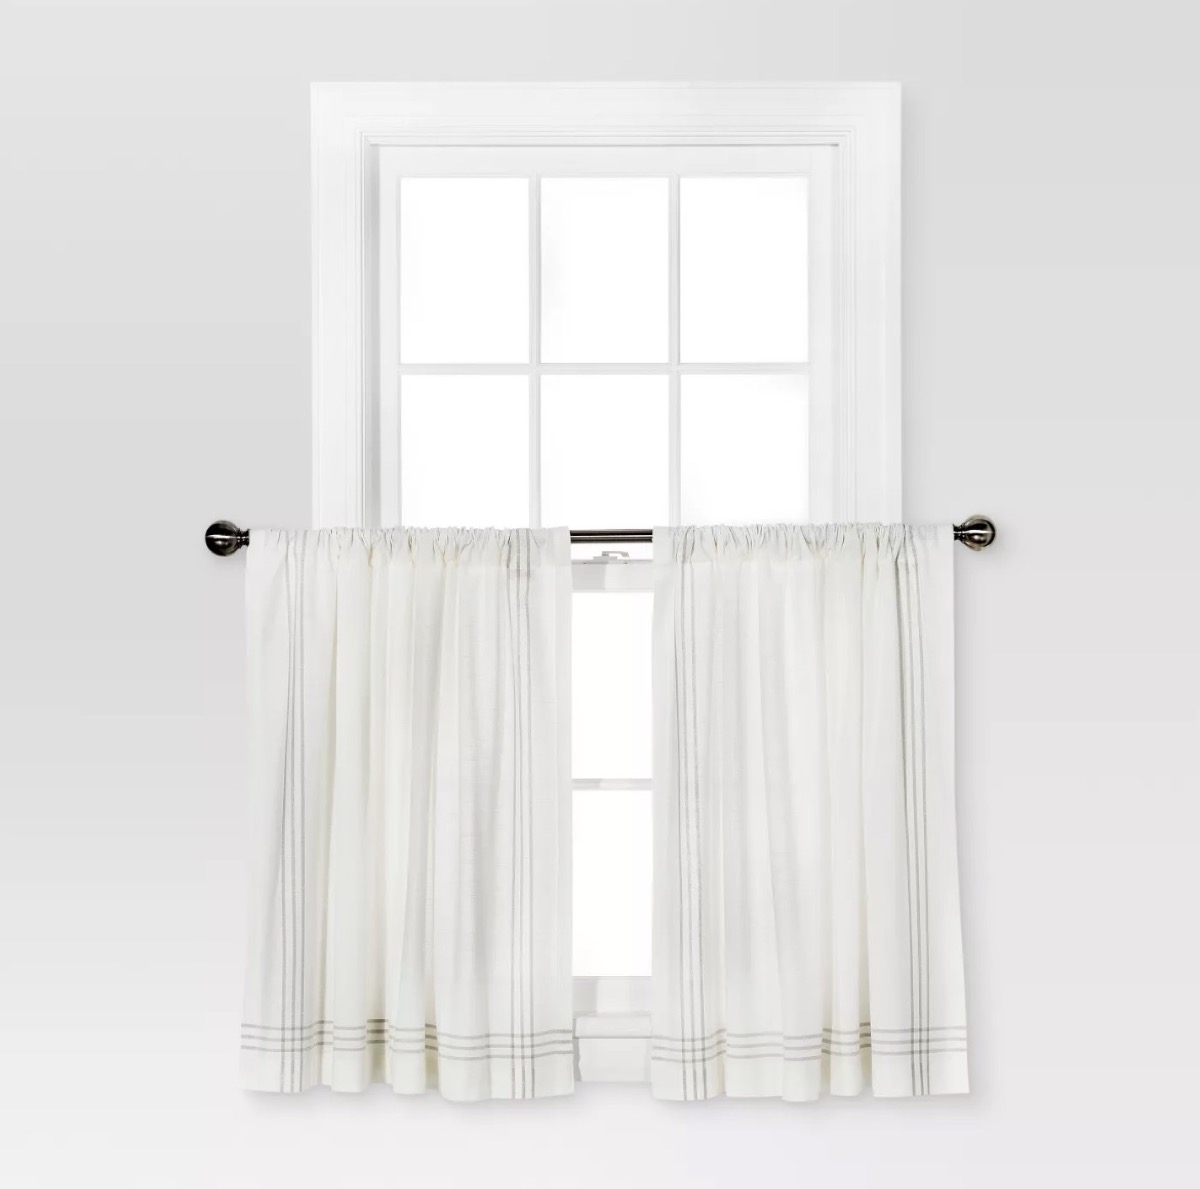 white cafe curtains on multipane window, kitchen decorations